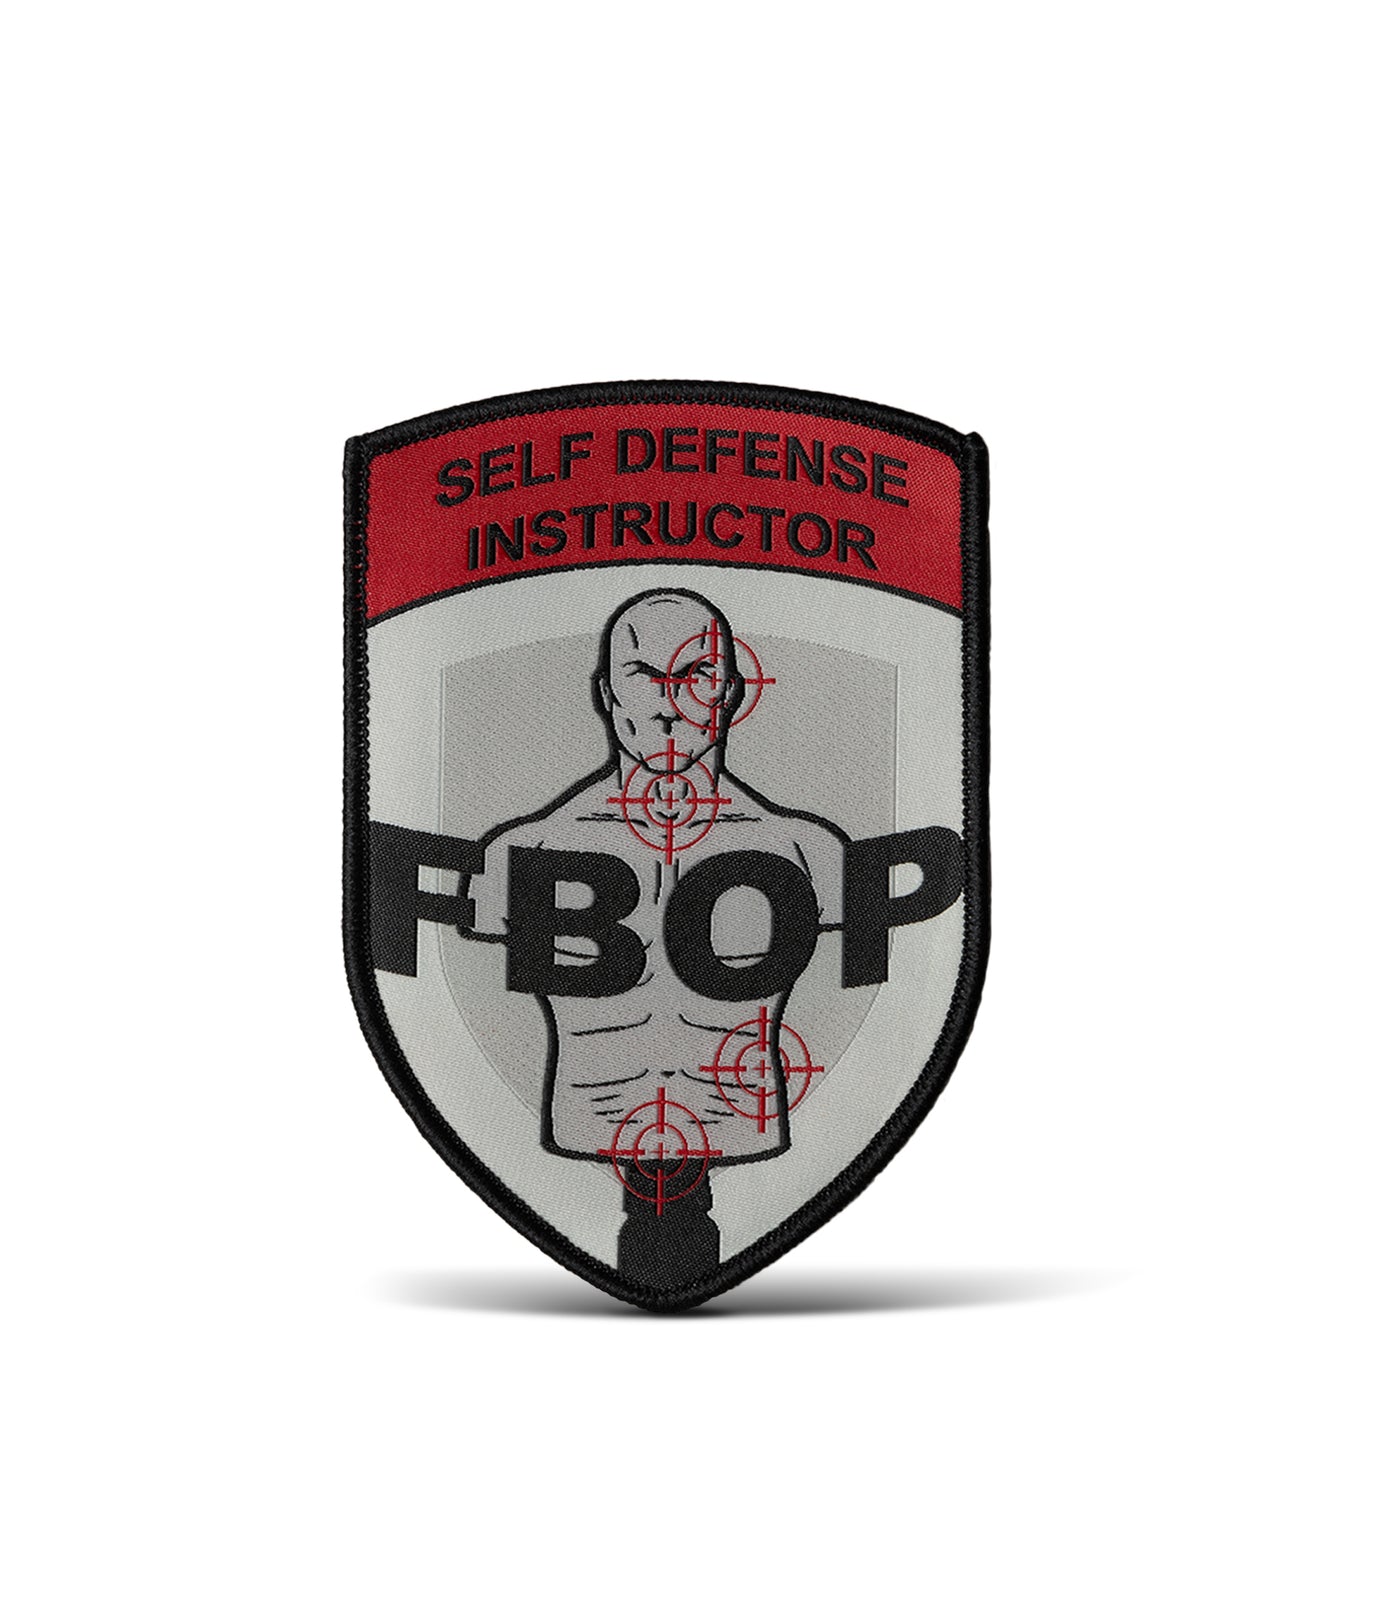 Self Defense Instructor Patch